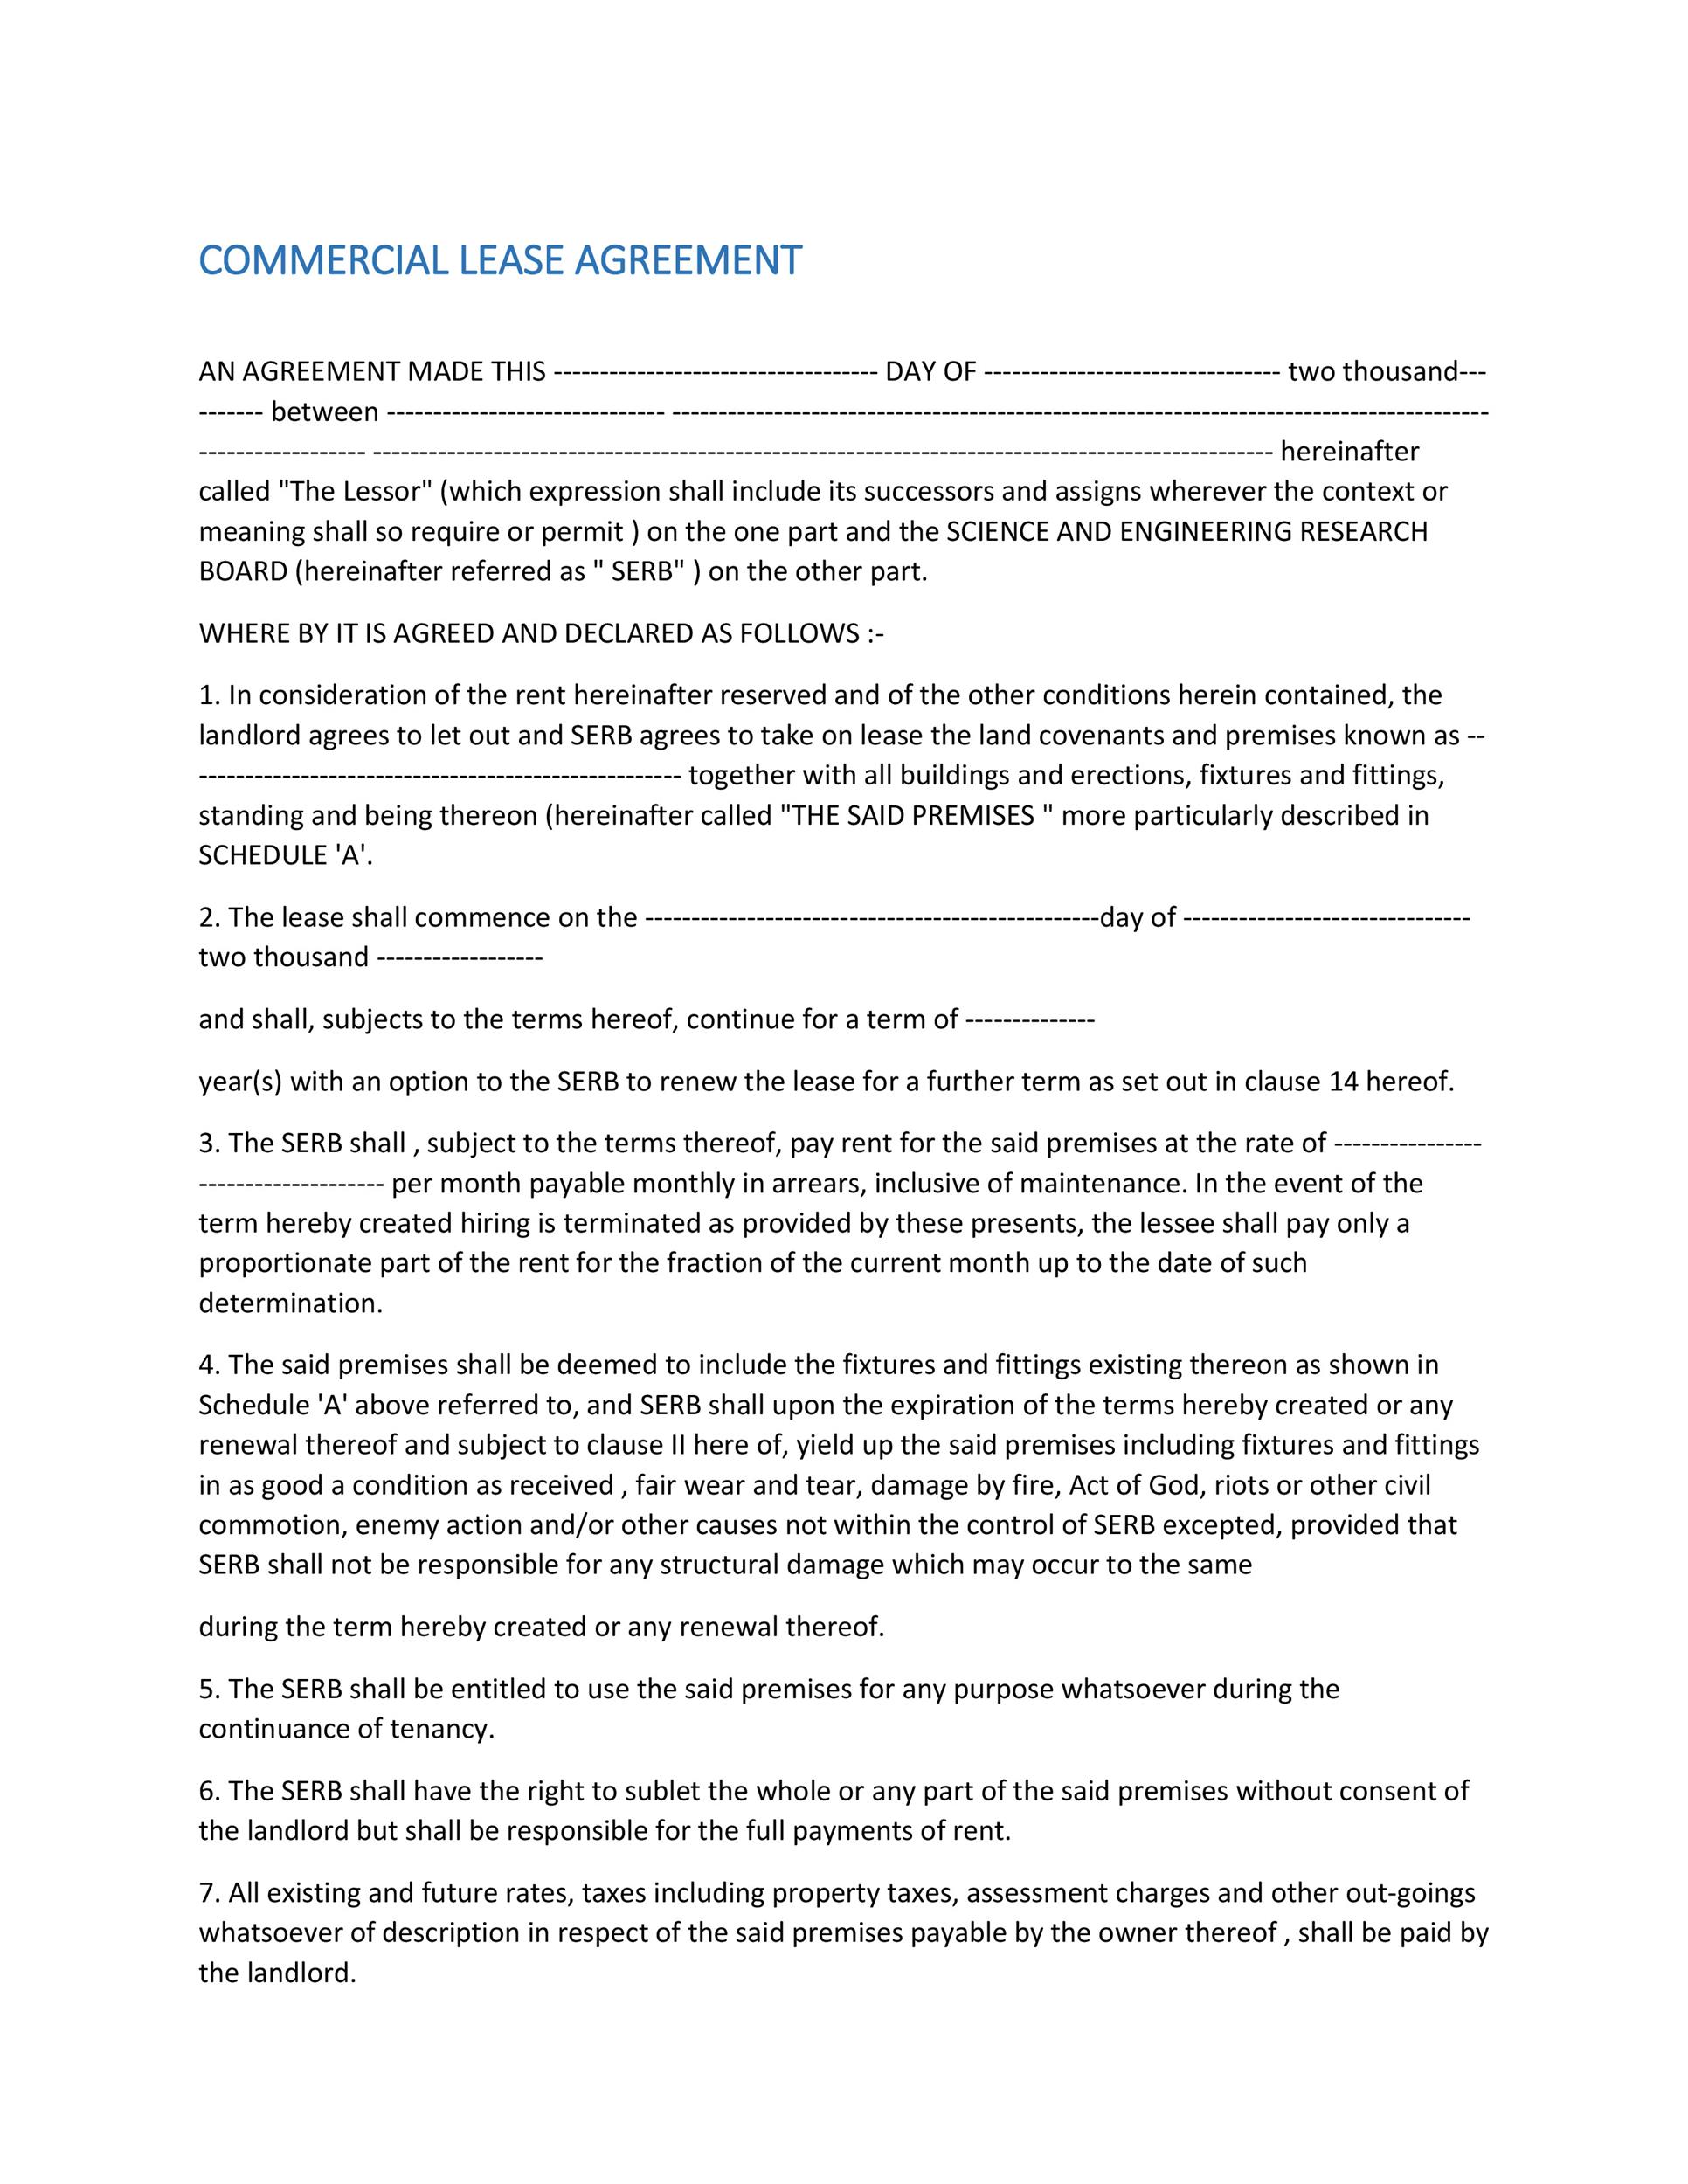 Free Commercial Lease Agreement Template 11